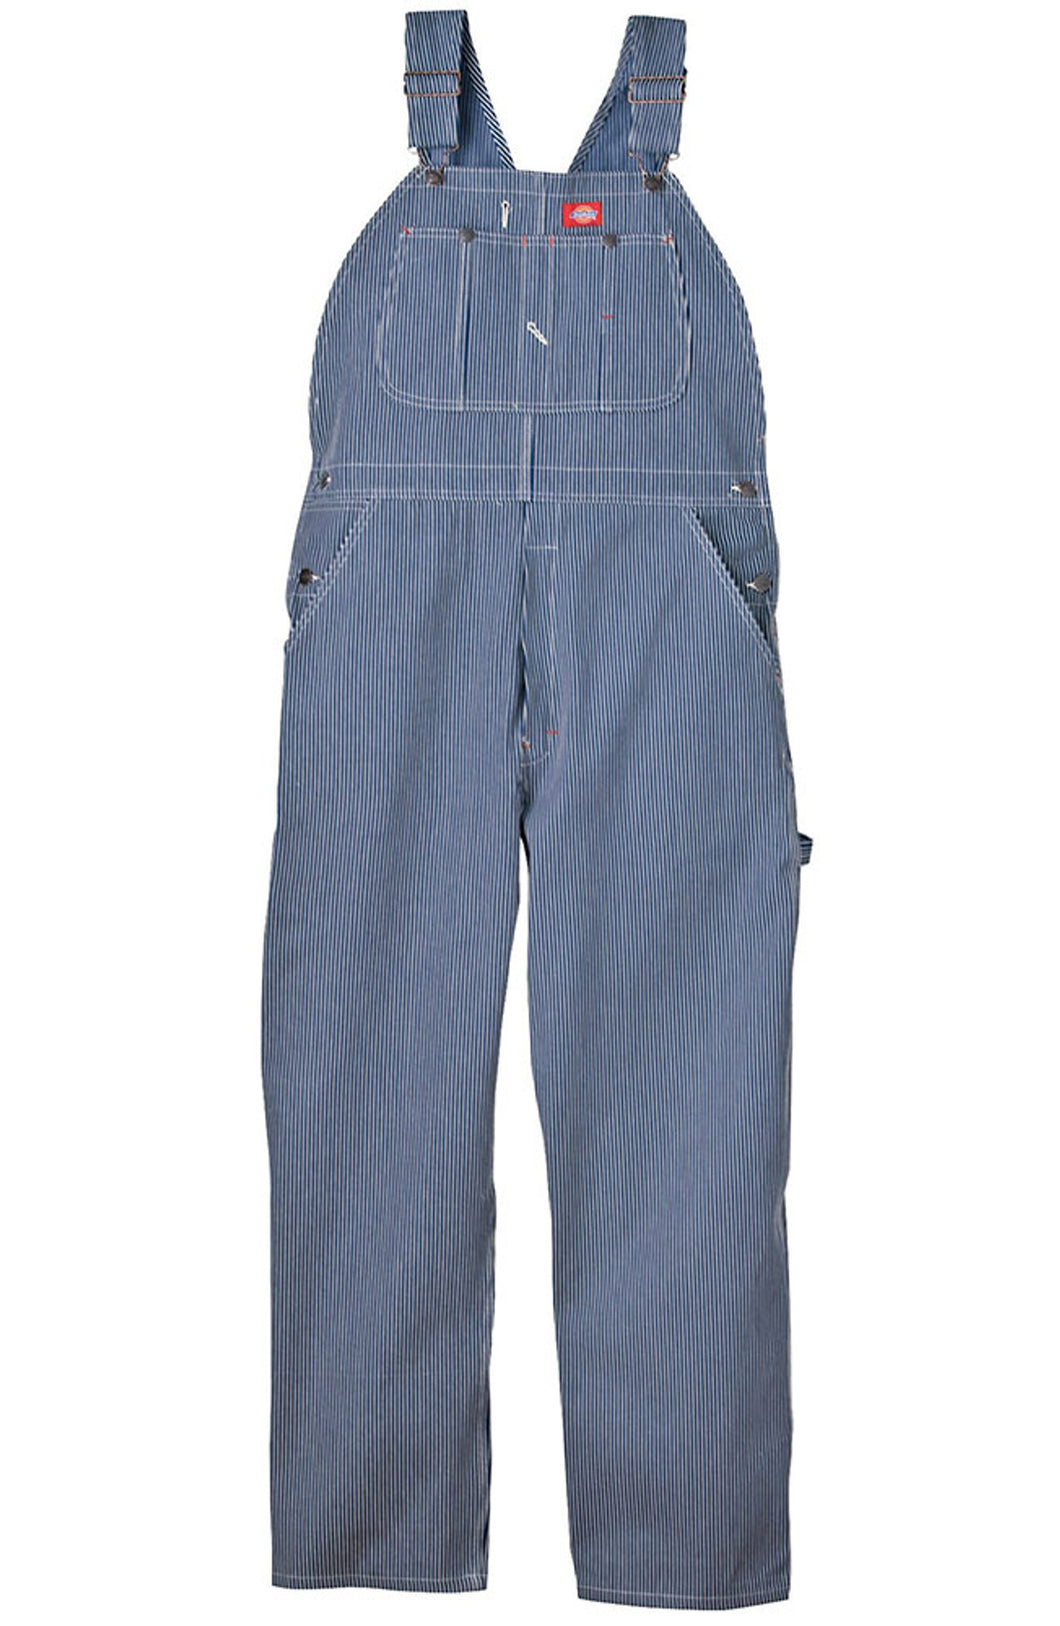 DICKIES- HICKORY STRIPE OVERALLS